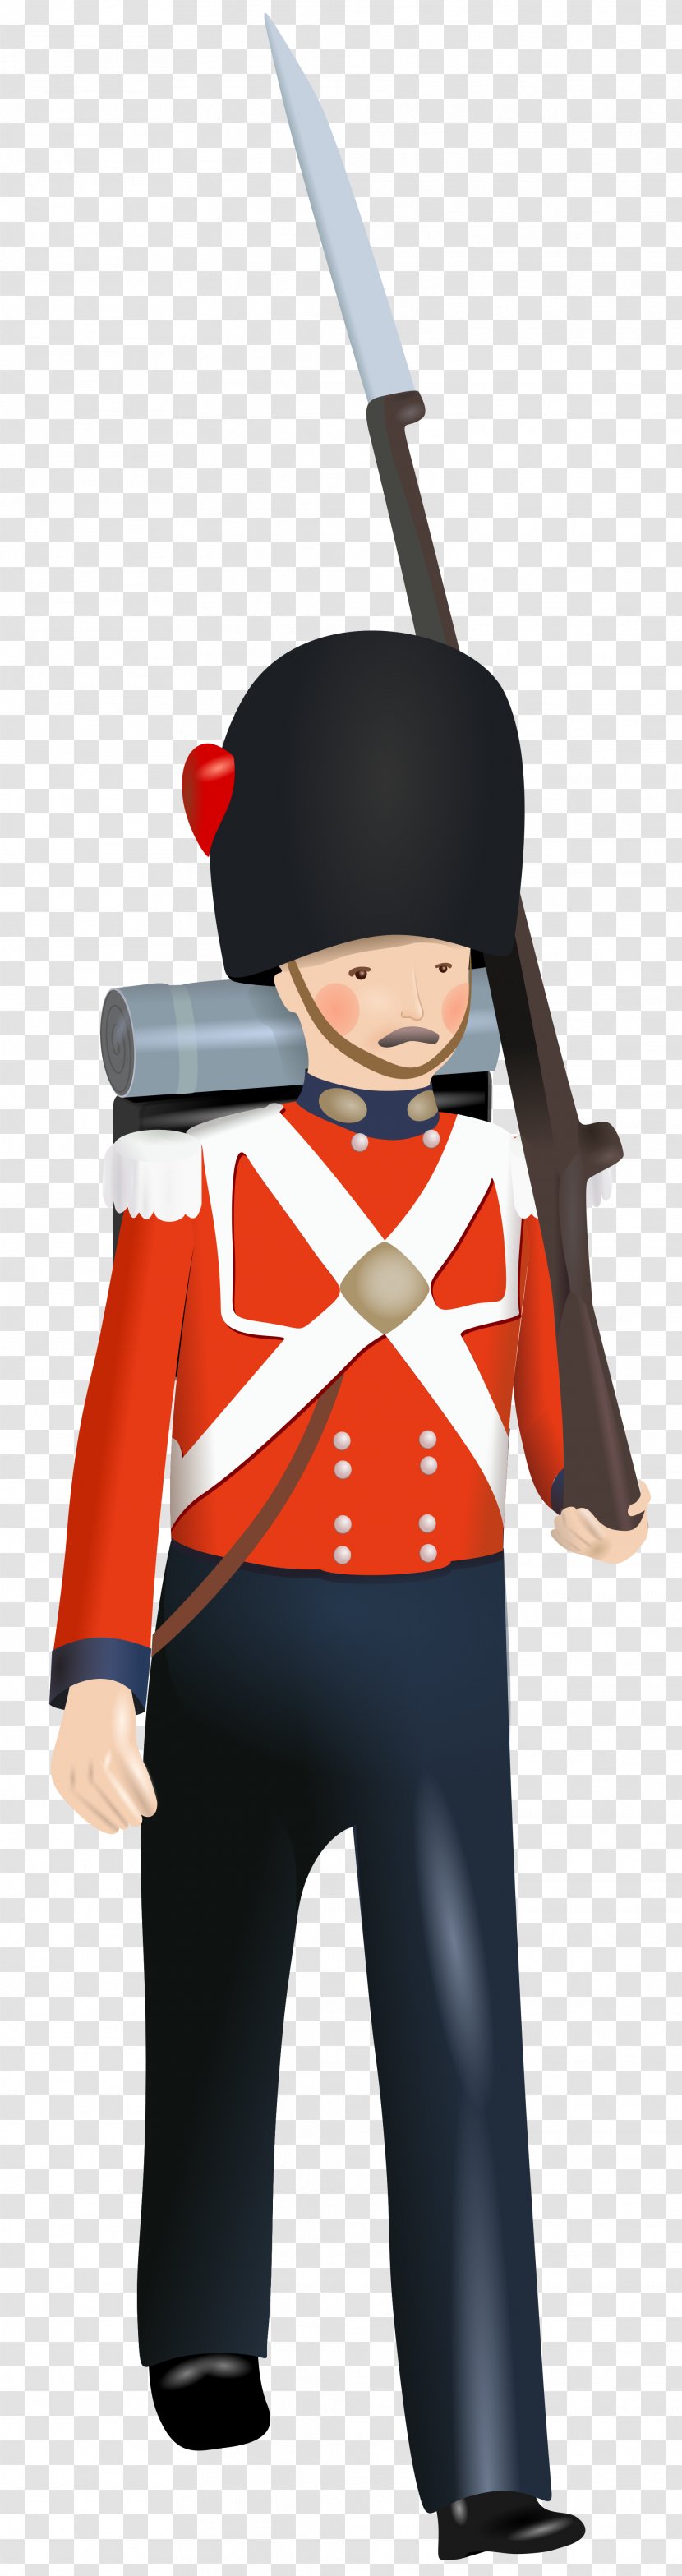 Toy Soldier Tin - Army - English Clipart Transparent PNG